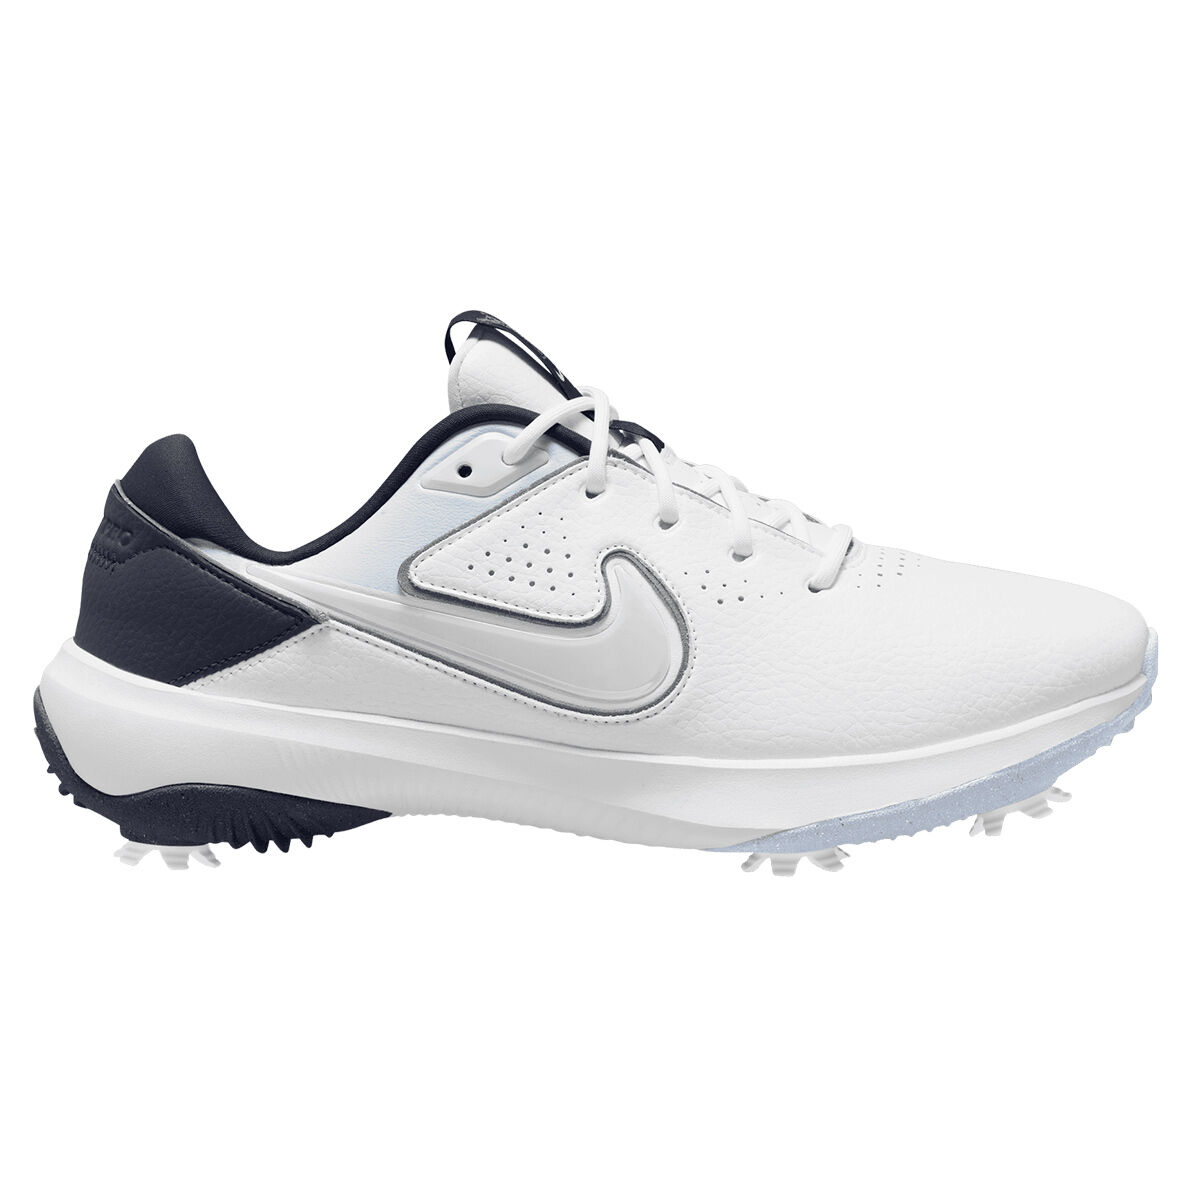 Nike Men's Victory Pro 3 Waterproof Spiked Golf Shoes, Mens, White/football grey/obsidian, 7 | American Golf von Nike Golf